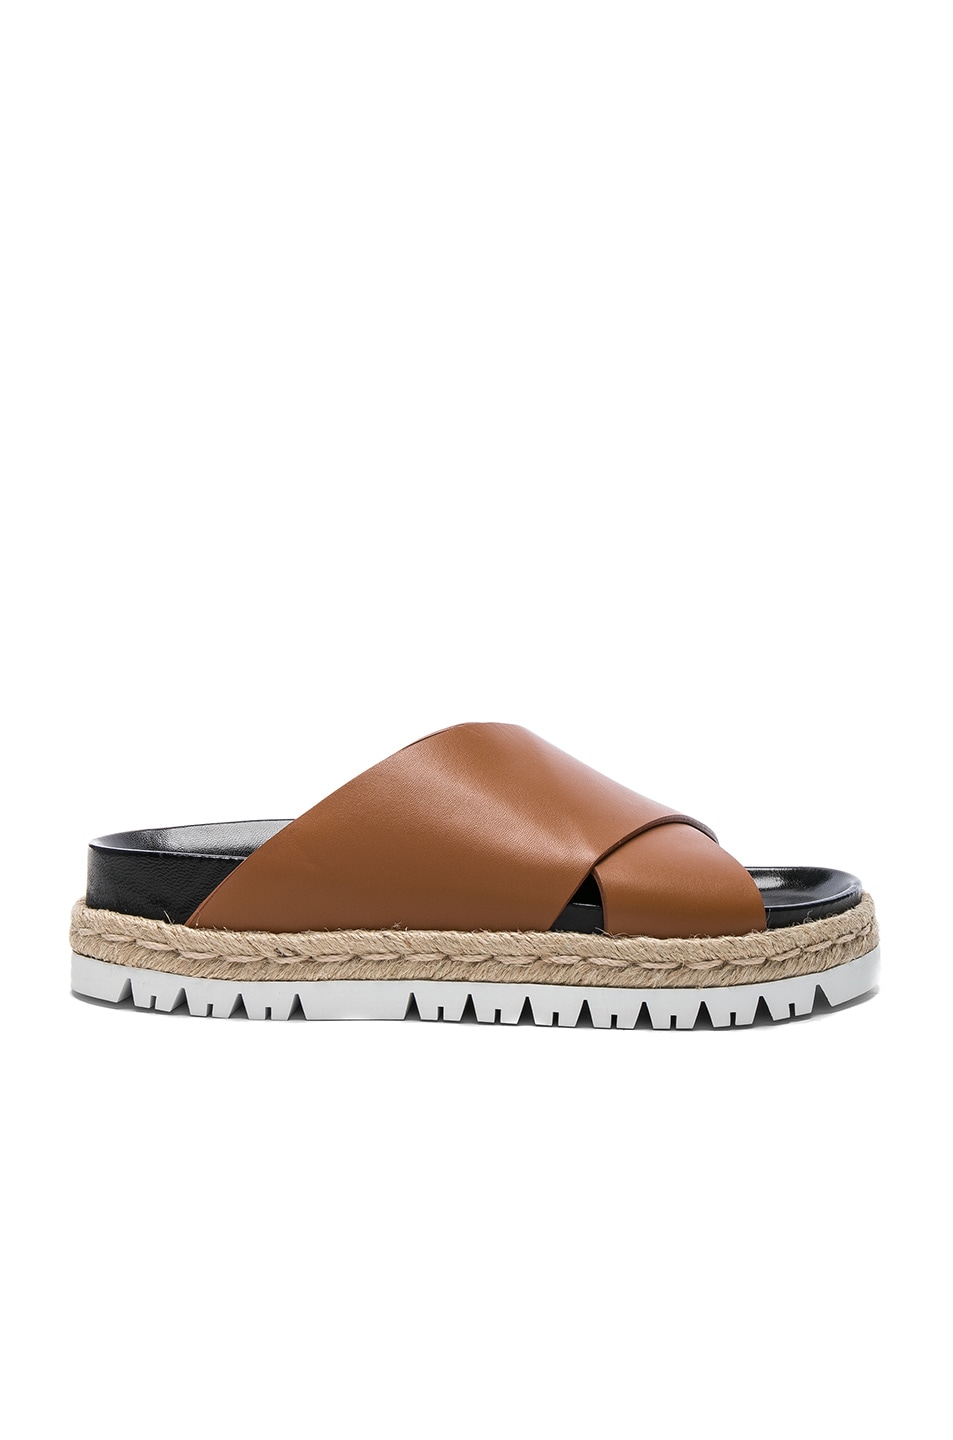 Image 1 of Marni Leather Fussbett Sandals in Marron